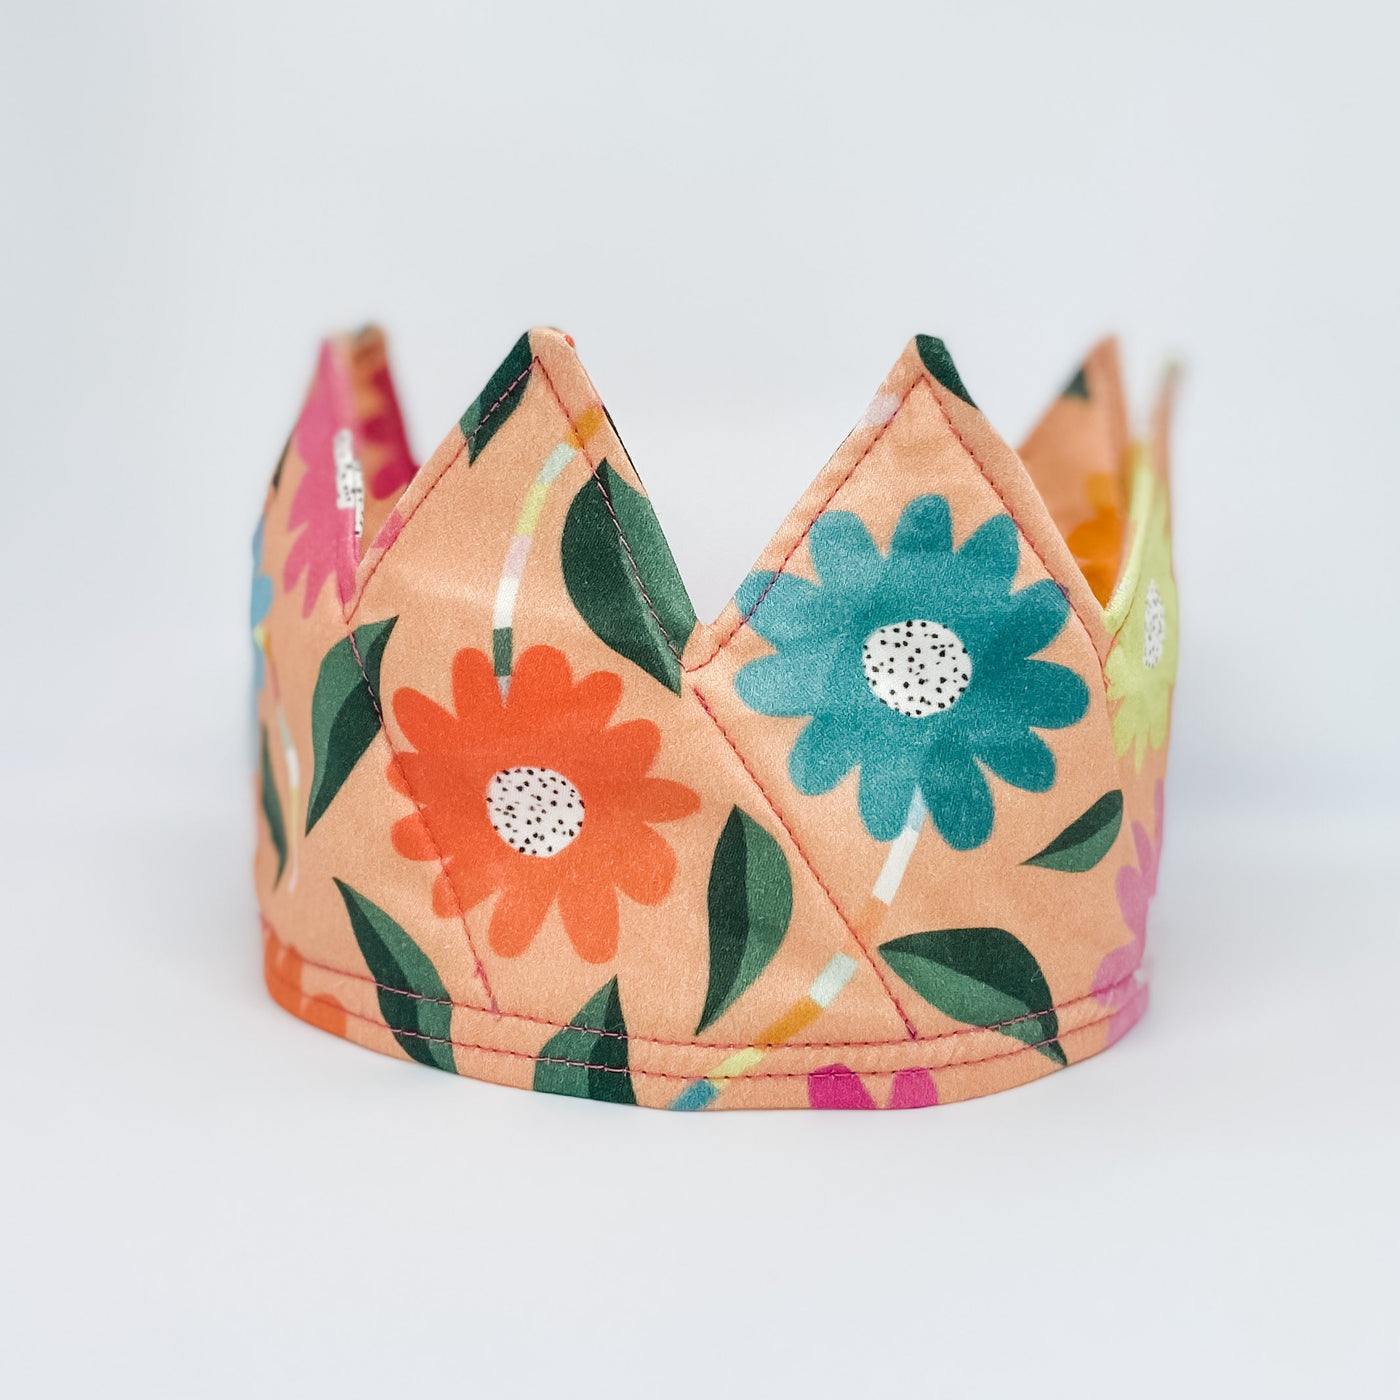 Limited Edition Handmade Crown (Oopsy Daisy)